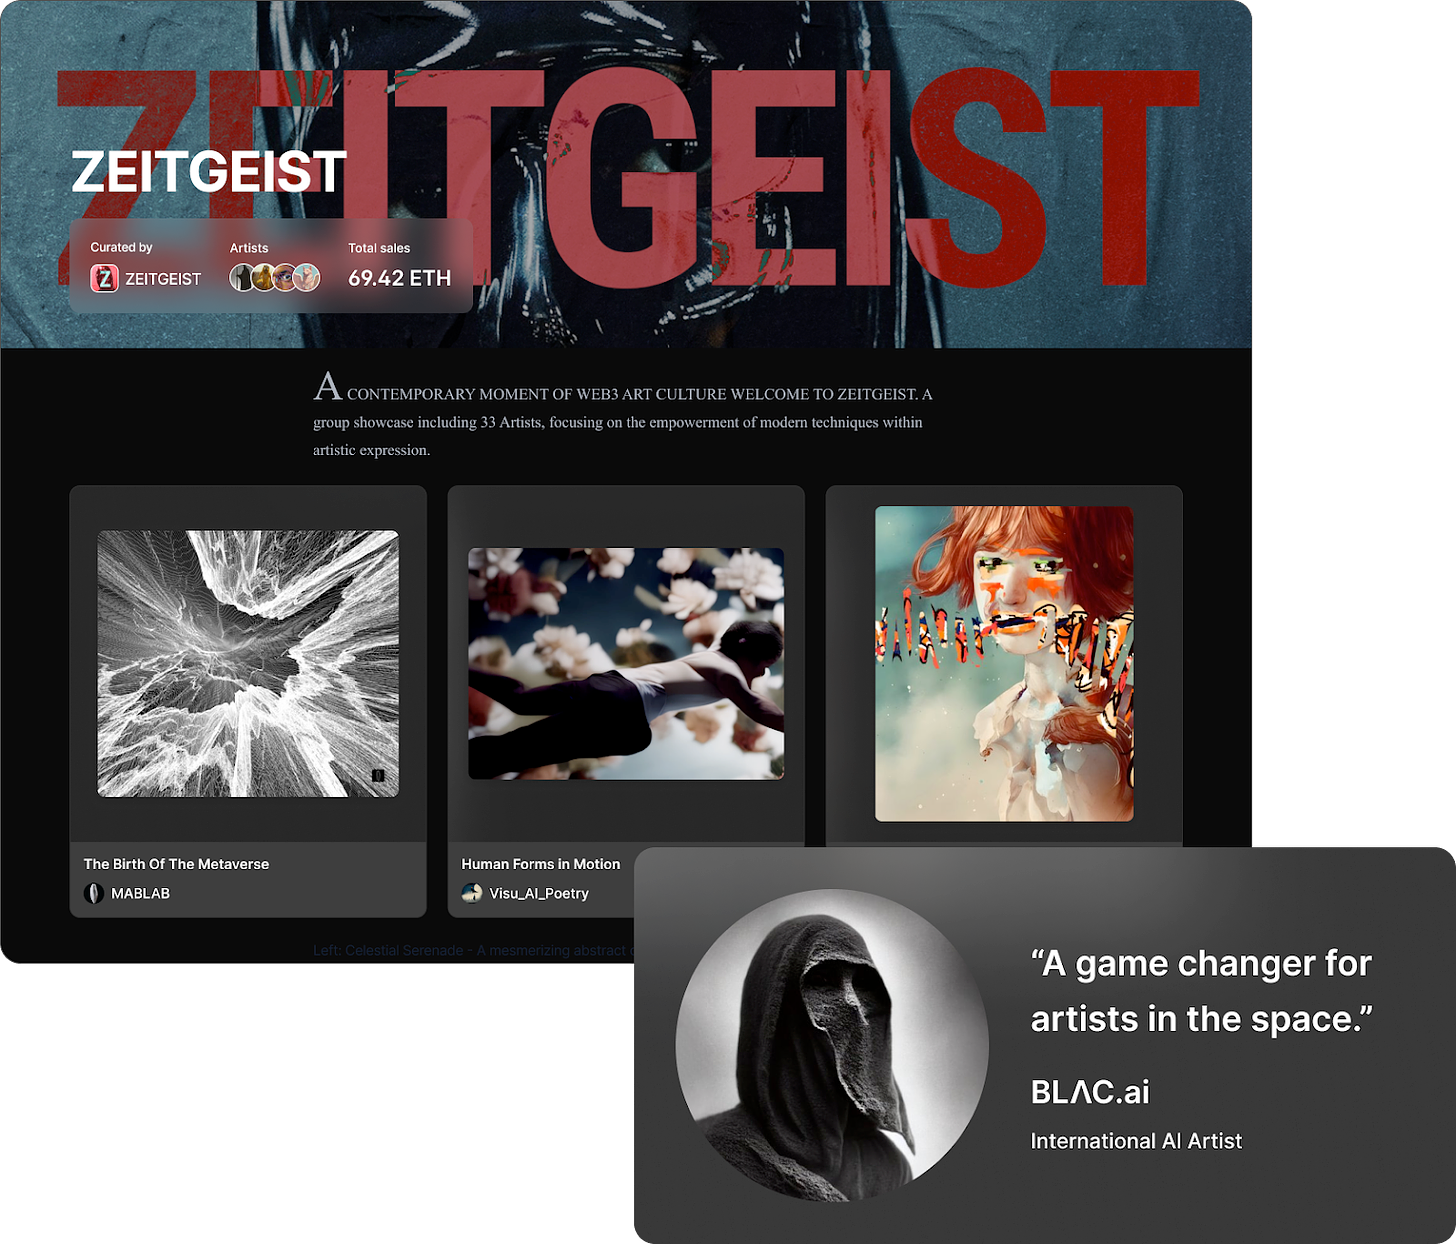 A contemporary moment of Web 3 art culture. Welcome to Zeitgeist. 